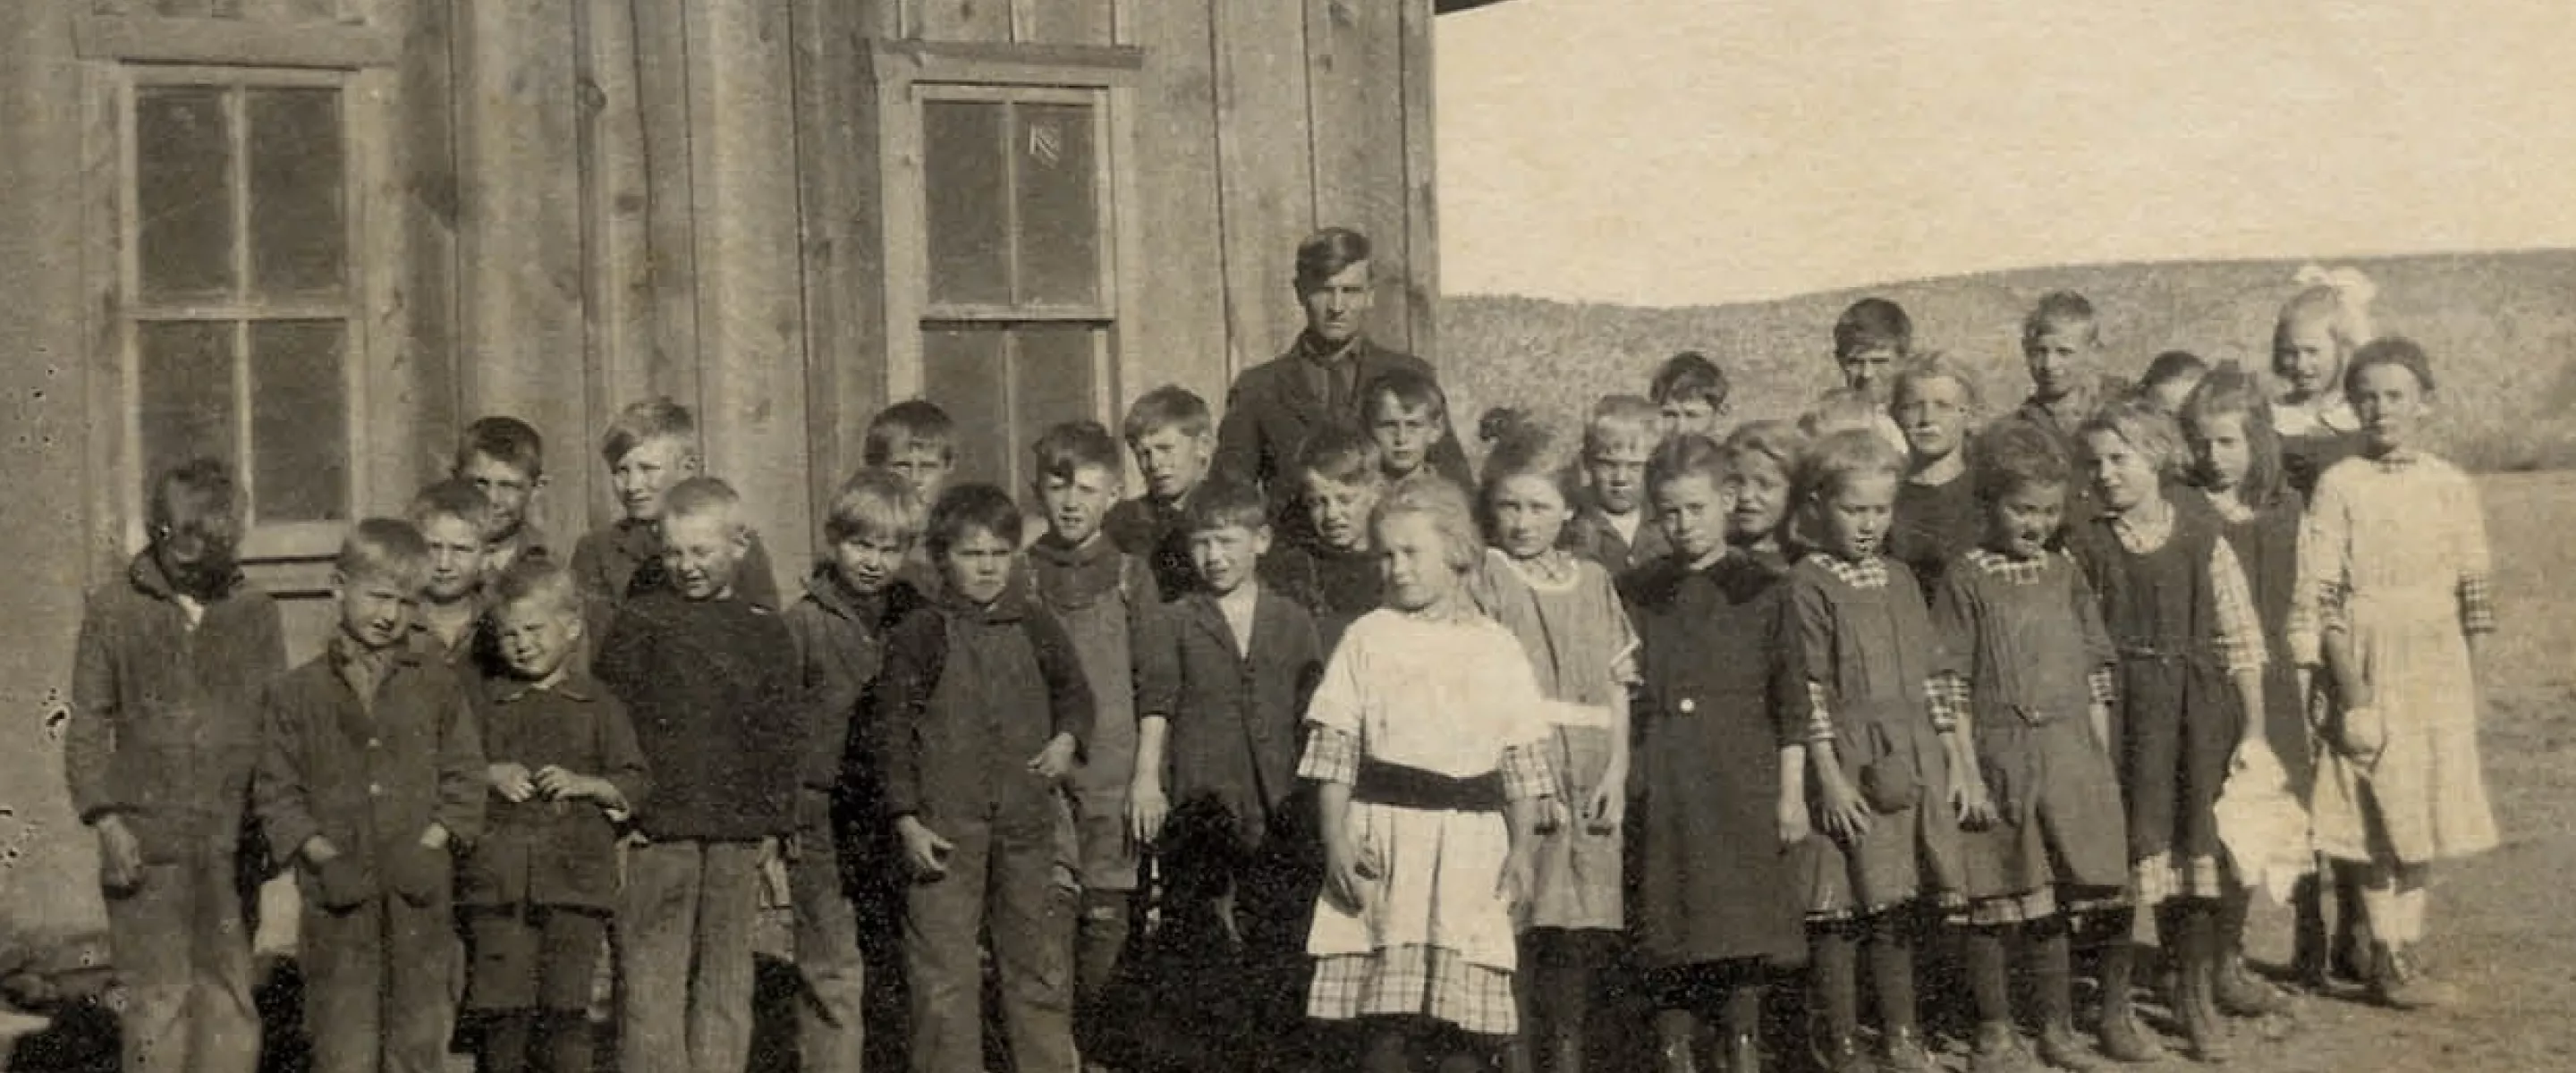 An old photograph of several school children standing in front of a wooden building with one adult among them.